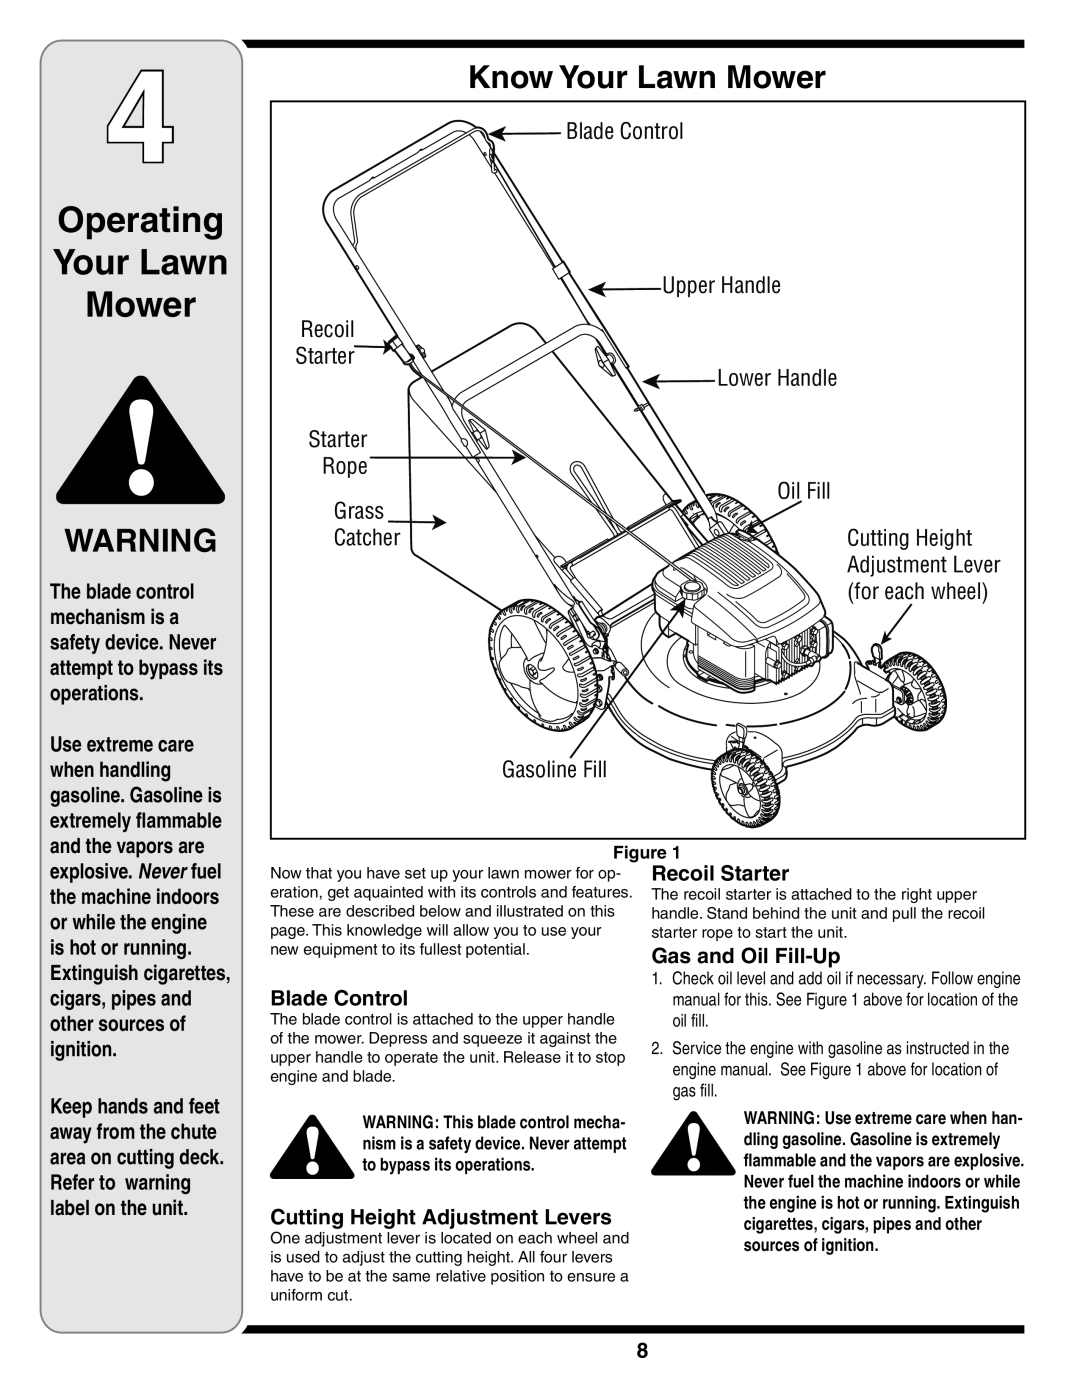 MTD 584 warranty Operating Your Lawn Mower, Know Your Lawn Mower 